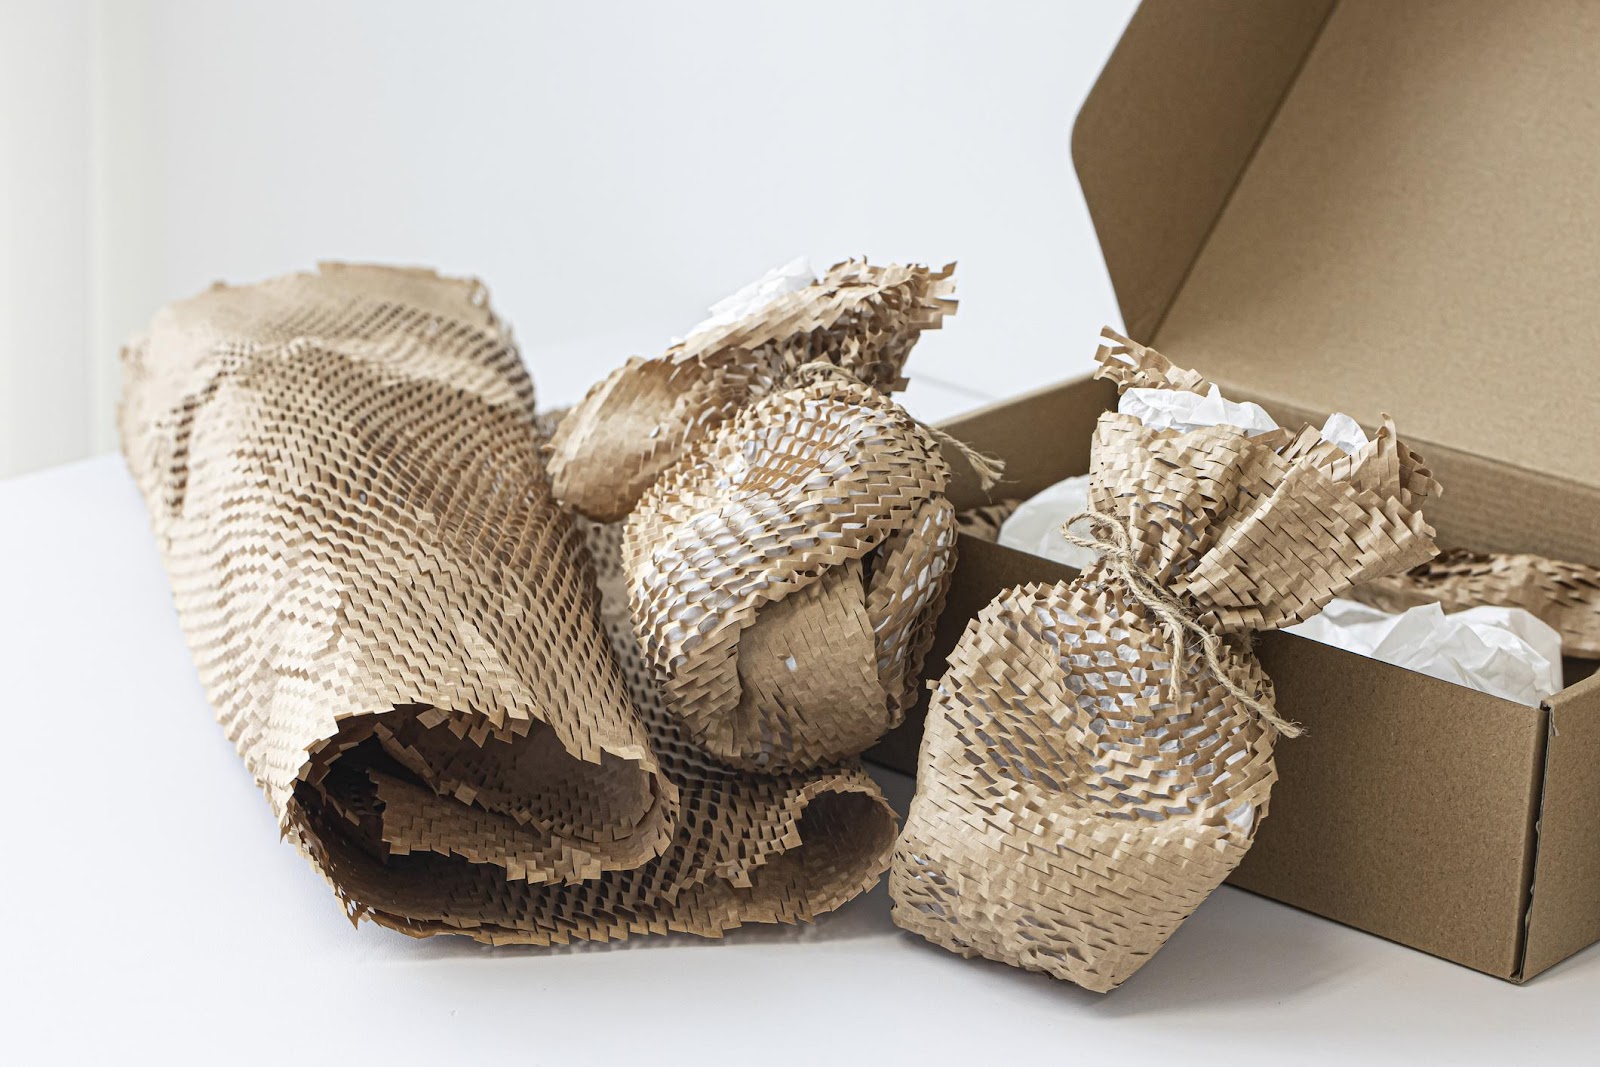 Honeycomb Packaging Paper